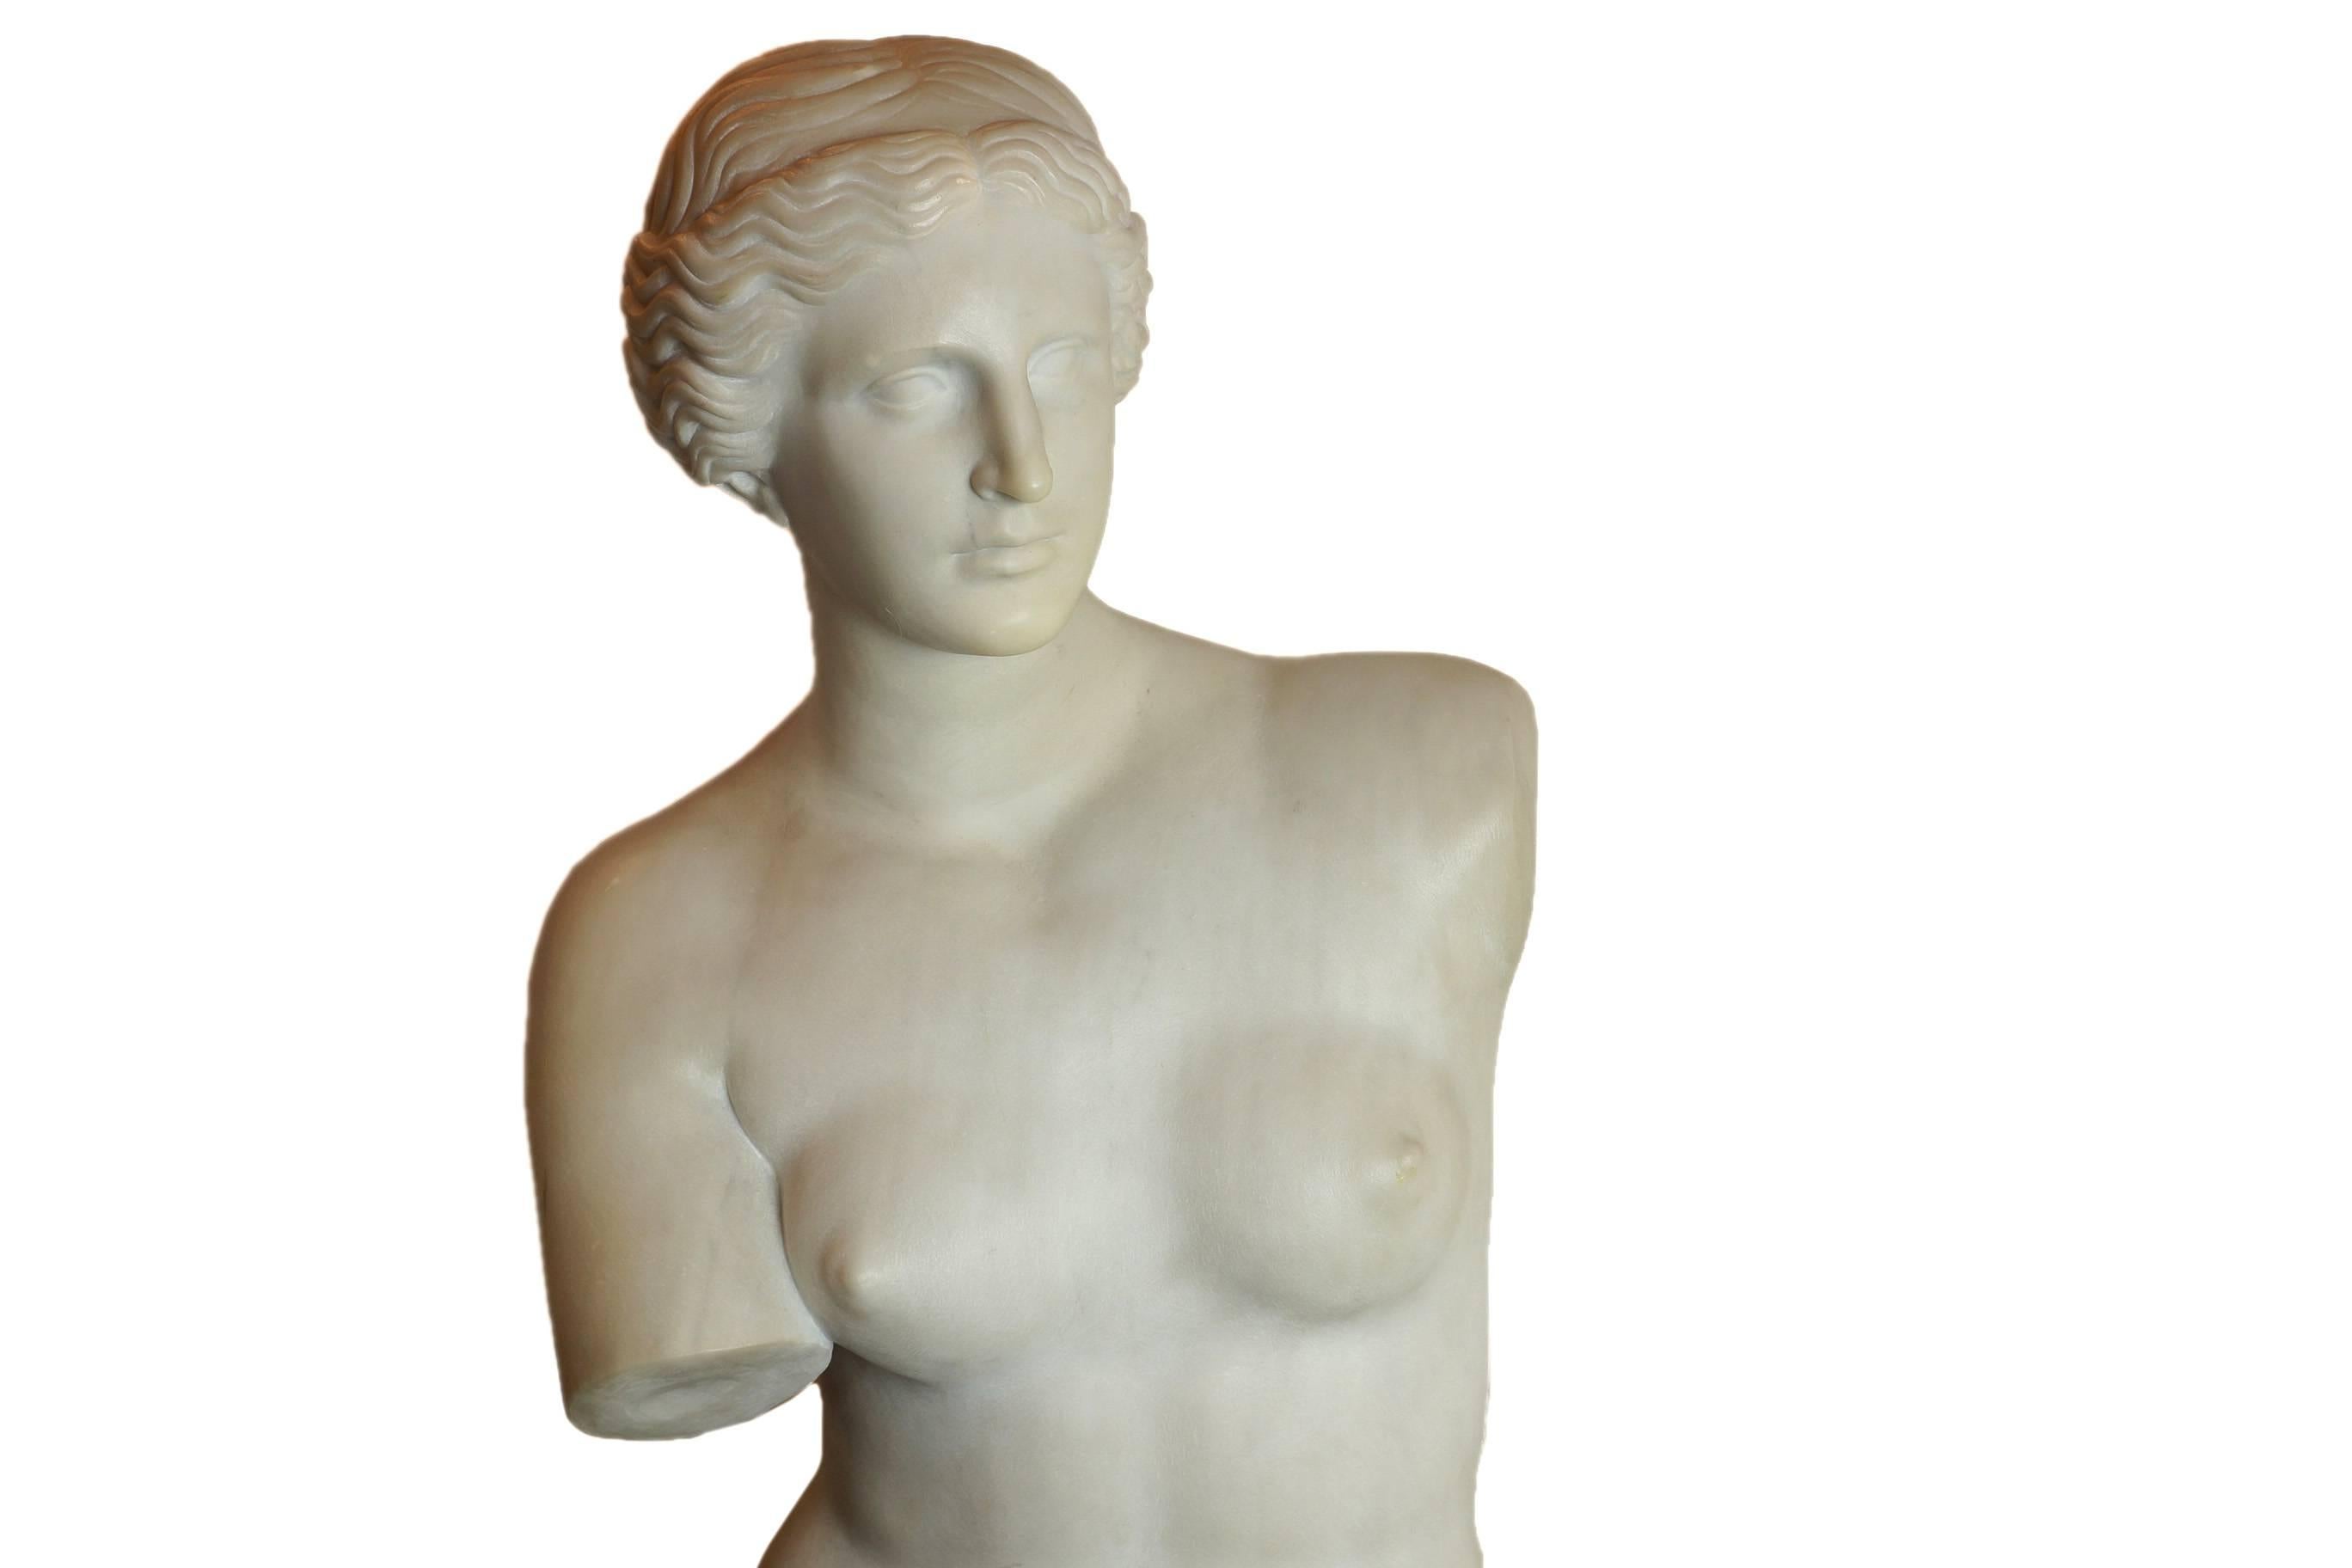 19th Century Fine Carved Italian White Marble Figure Statue of a Neoclassical Standing Nude